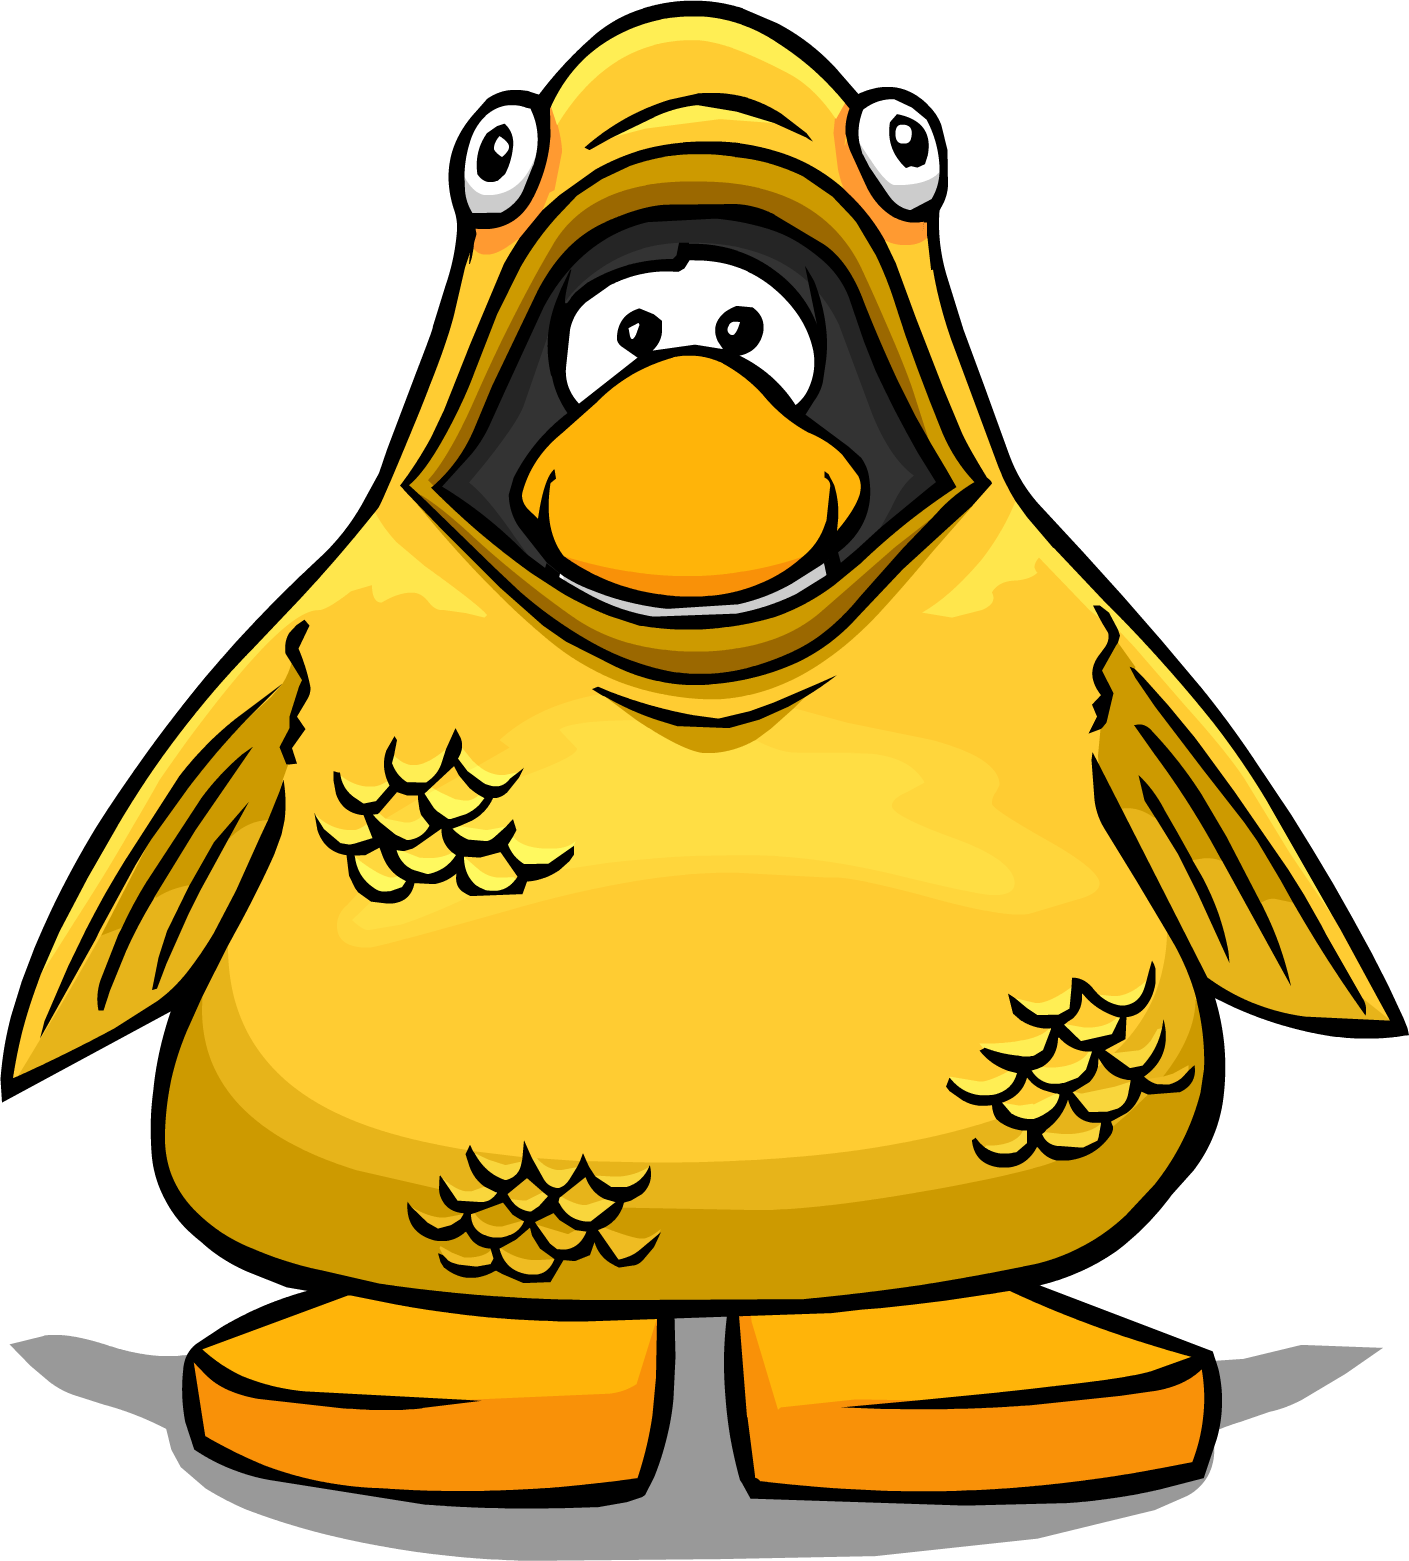 Club Penguin Chilly Willy Youtube Game - Club Penguin Chilly Willy Youtube Game (1409x1561)